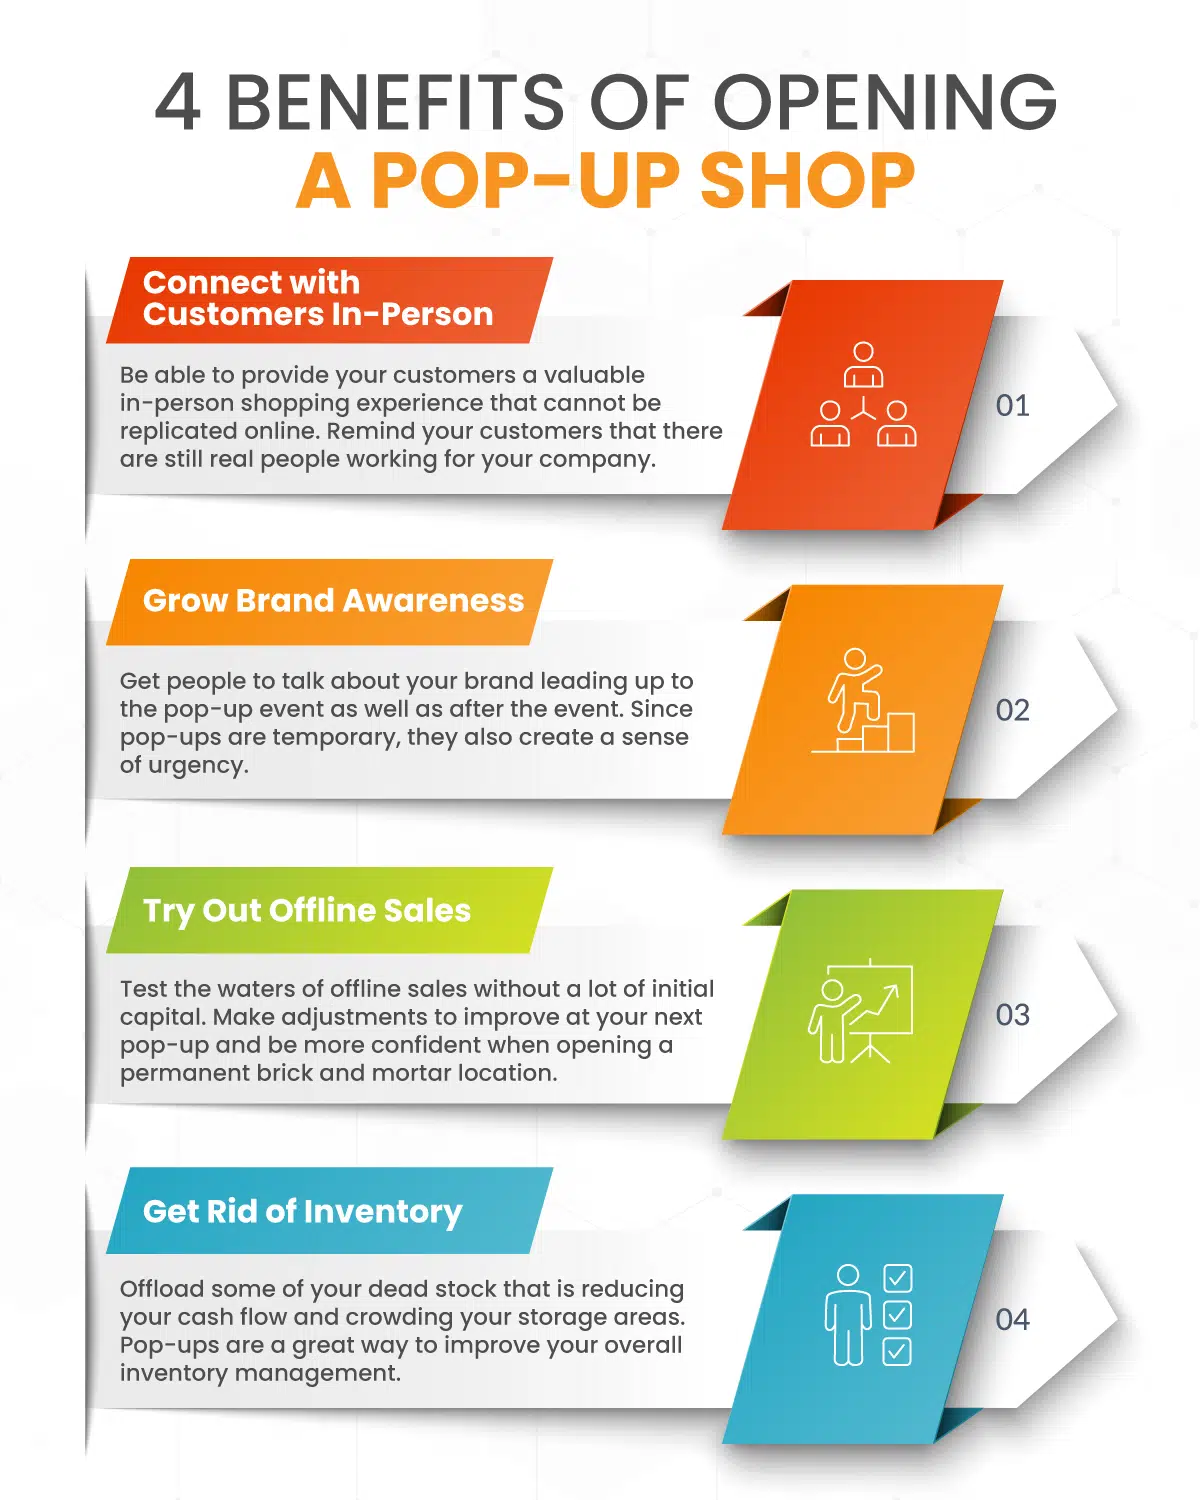 an infographic illustrating the '4 benefits of opening a pop-up shop'